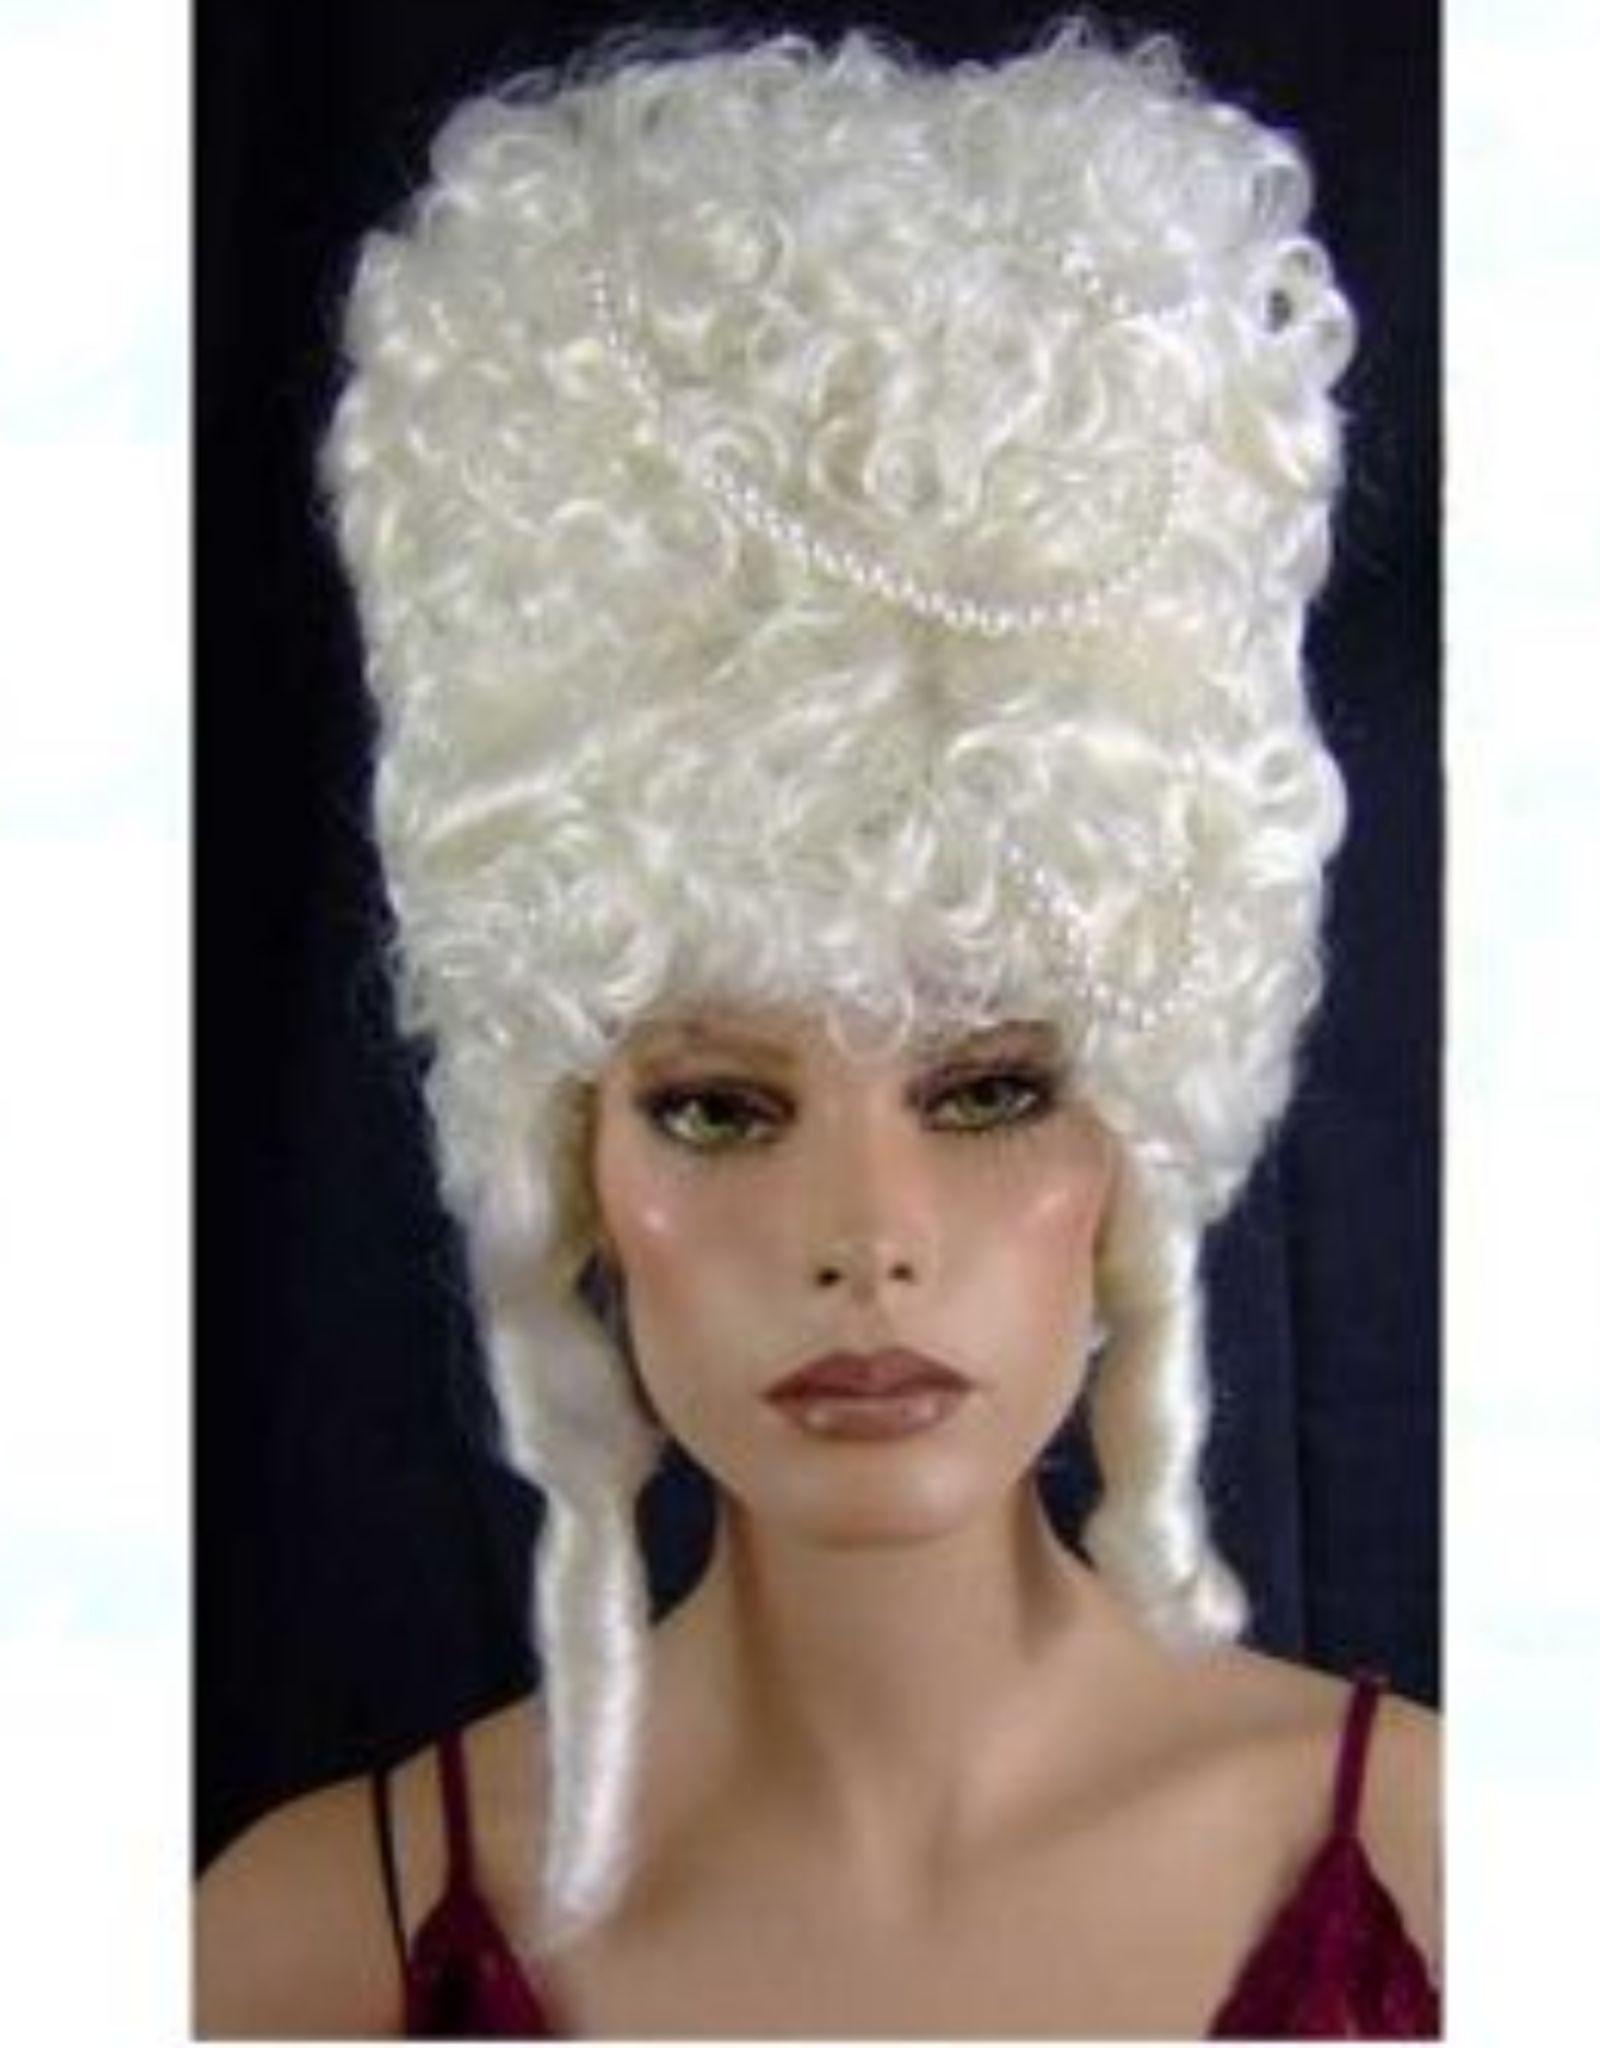 WIG-CTR-NOBLE WOMAN, WHITE